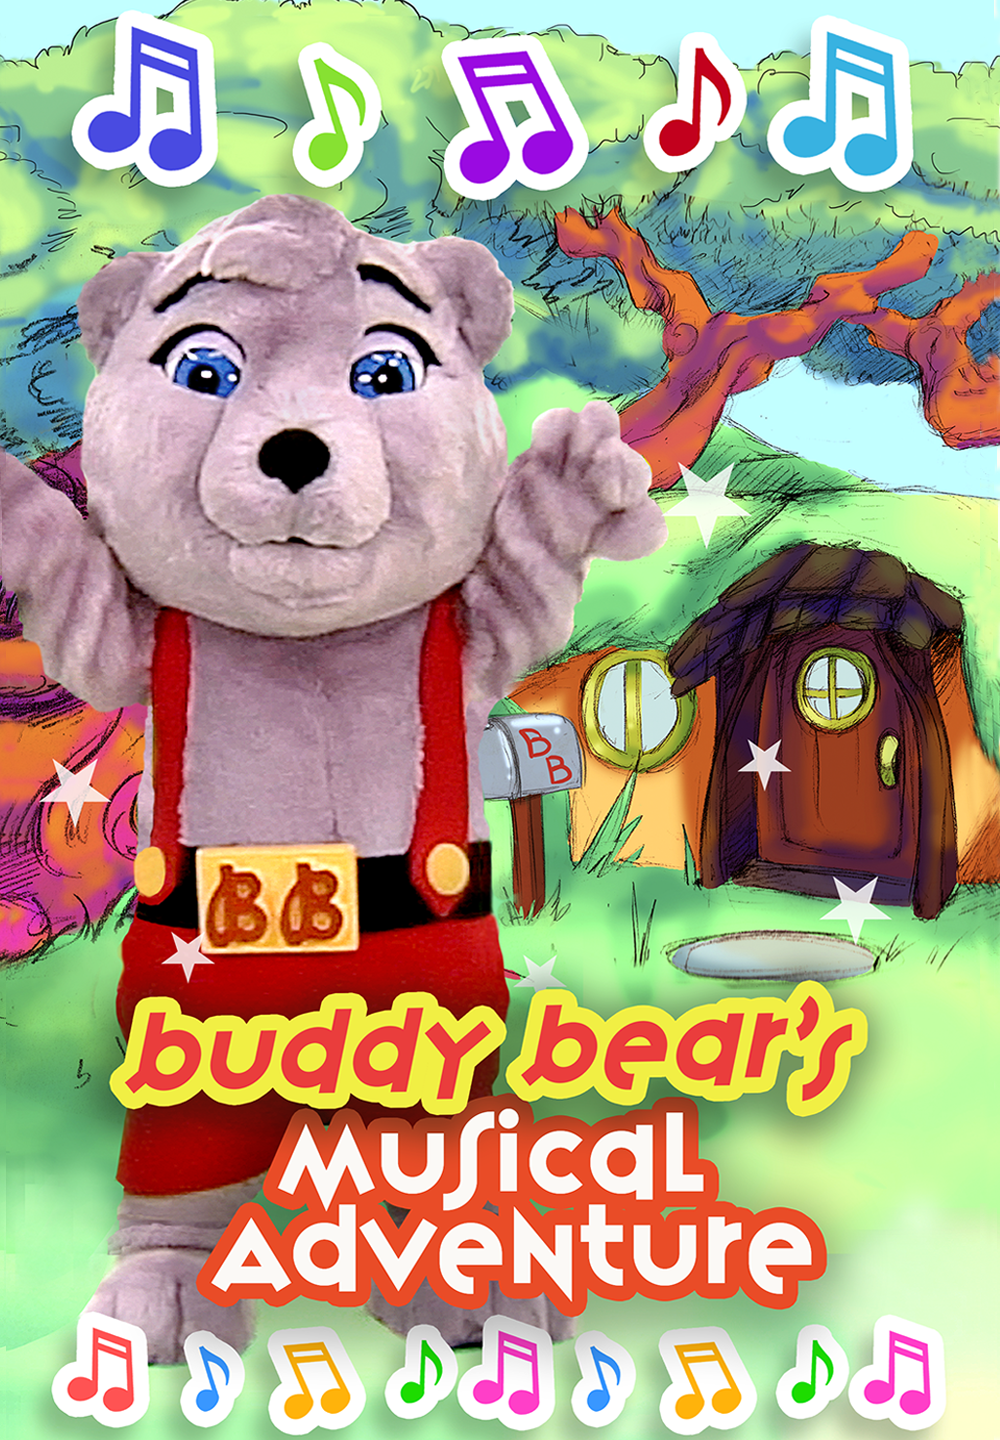 Buddy Bear’s Musical Adventure + A Magical Show for Toddlers and Preschoolers Premieres Exclusively on Apple iTunes and Google Play